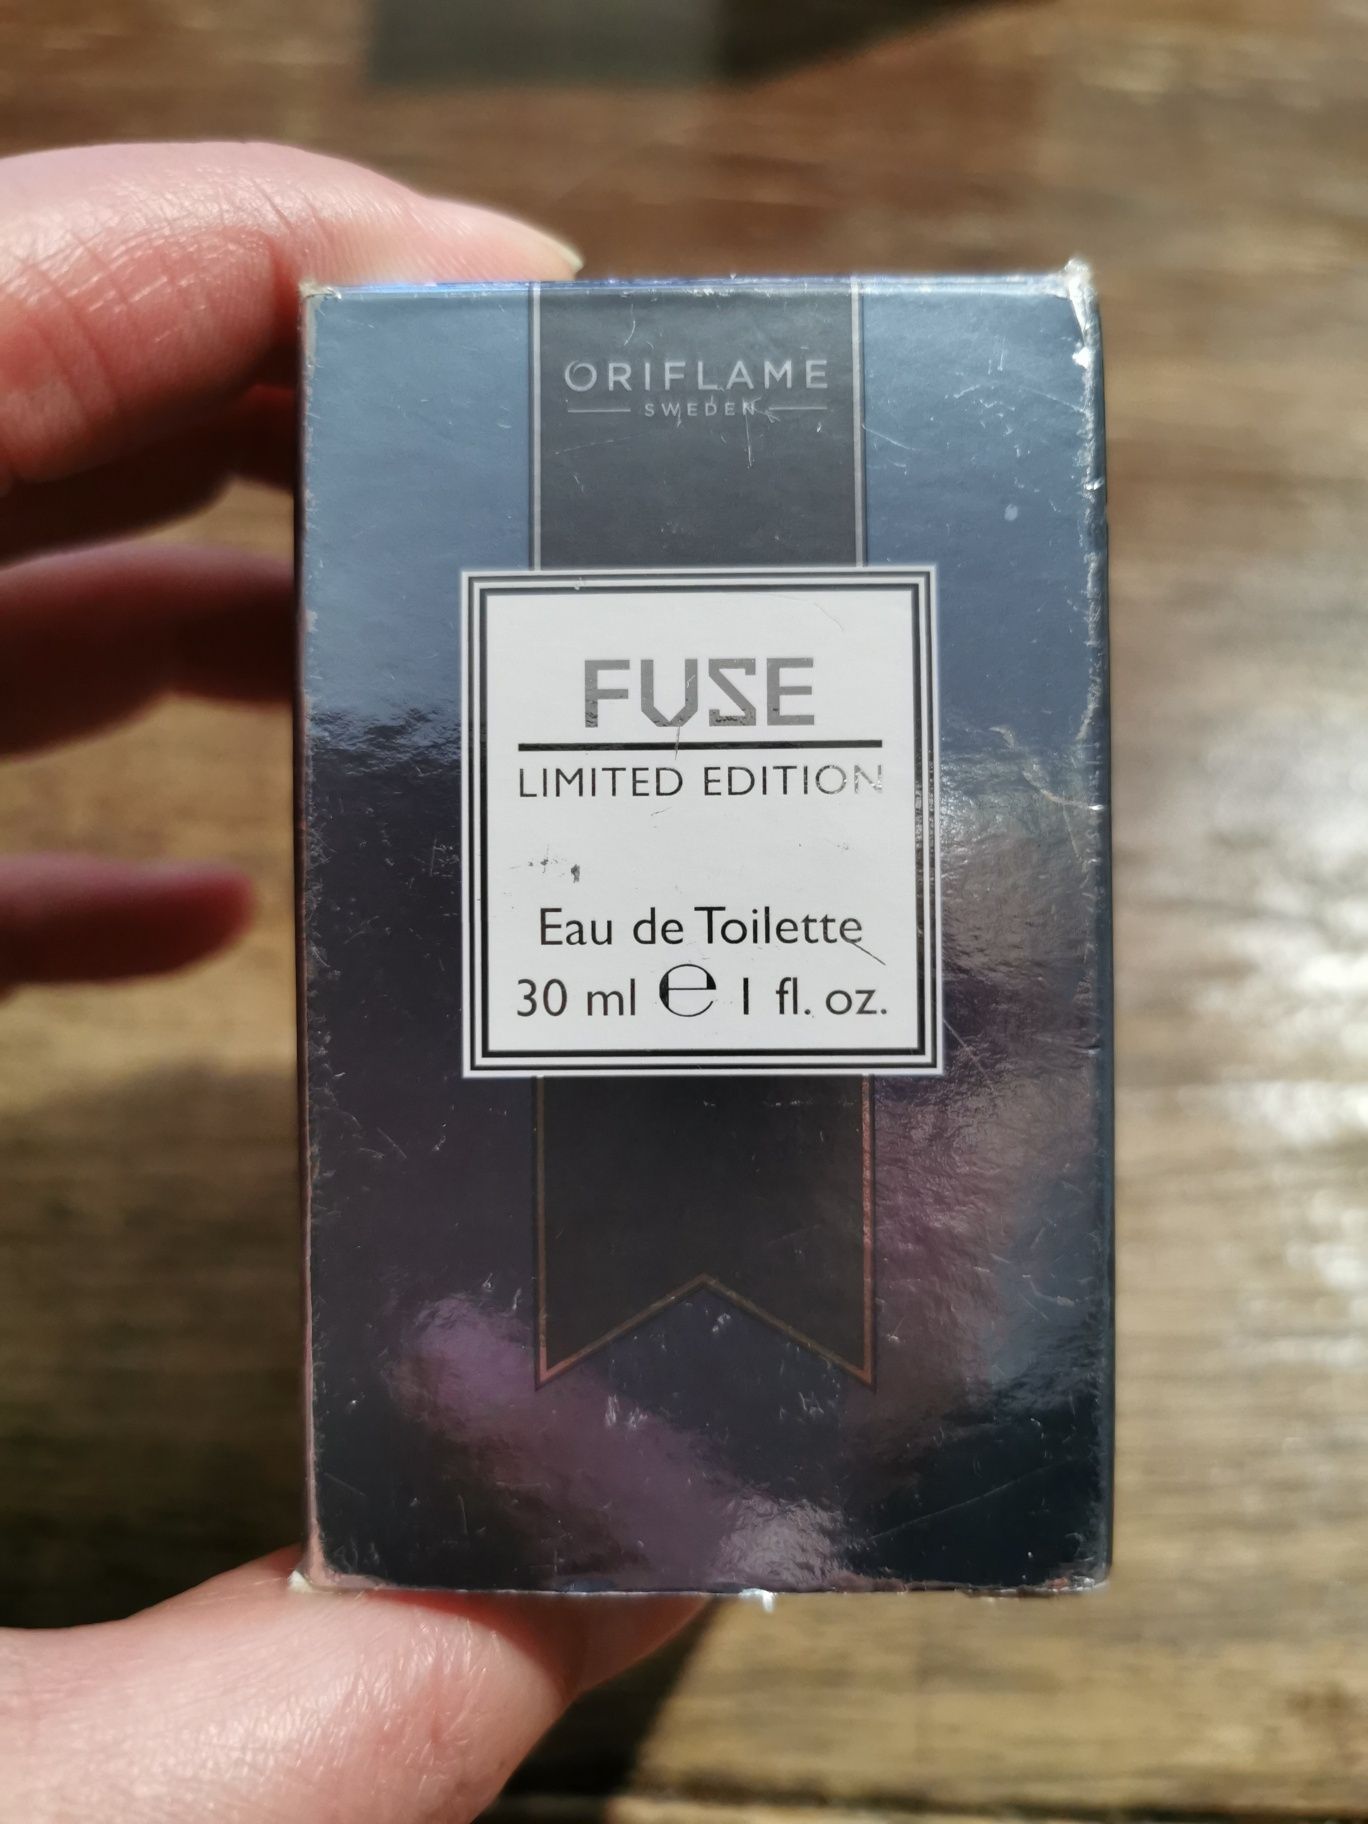 Fuse limited edition